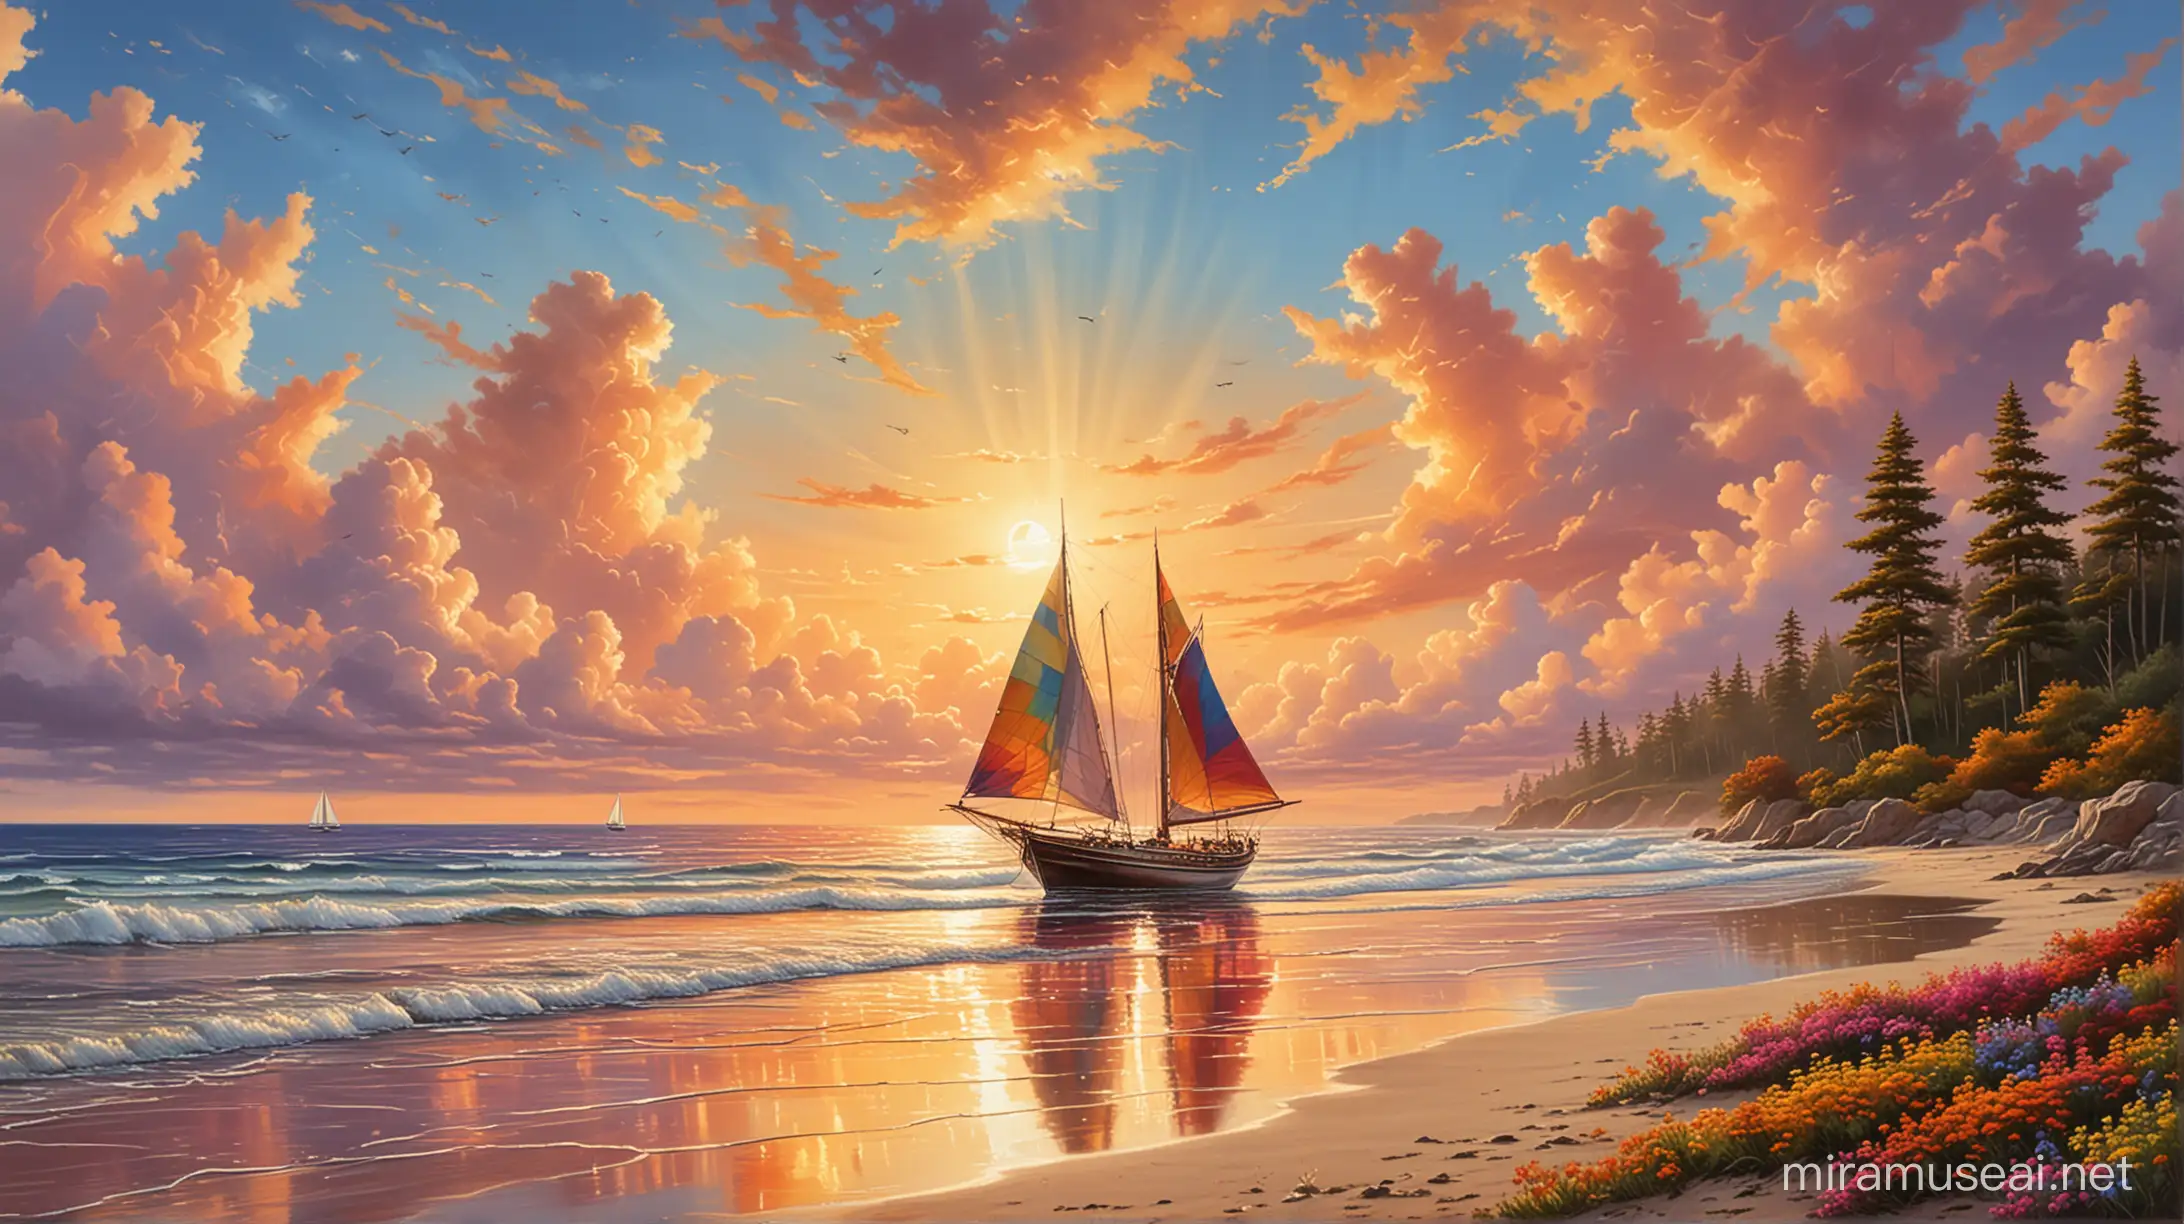 /imagine a artist rendering of an oil painting with
 multicolored cloud sky and sunset above an ocean with all the colors of the clouds refelected on the ocean service.  There is a beautifully depicted artist close up of a beautiful sailboat with all of it's sails up.  Along the shoreline are beautiful tall trees with multicolored ground flowers.  The sand is golden and sparkling